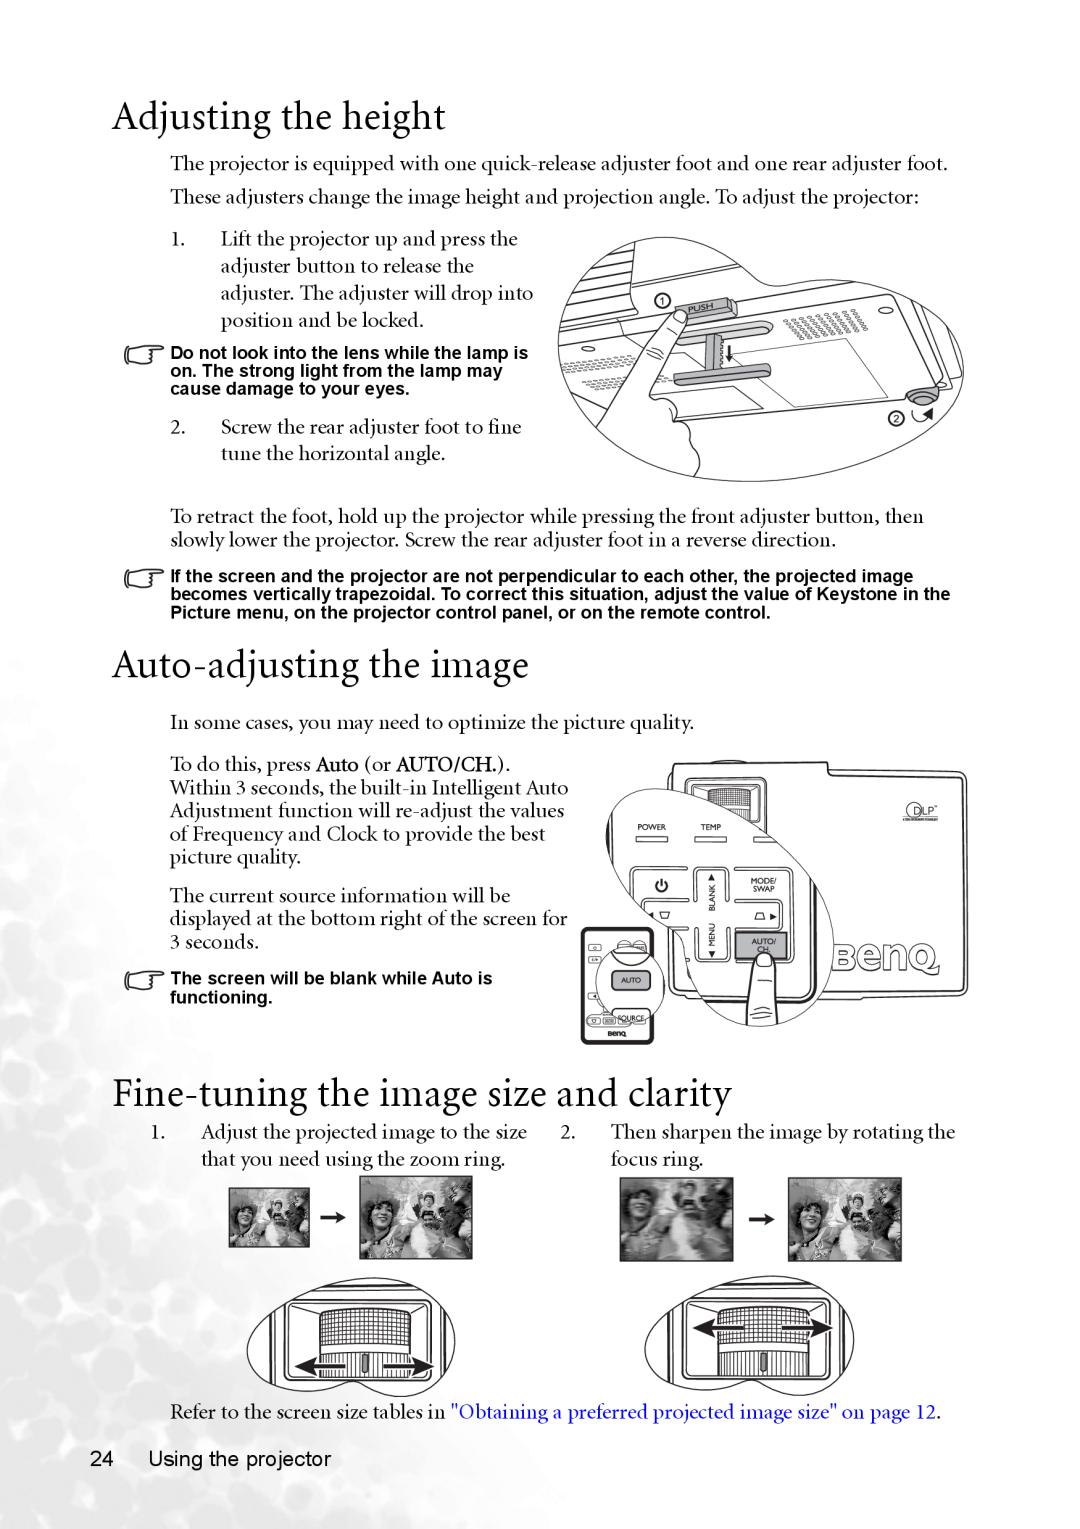 BenQ CP120 manual Adjusting the height, Auto-adjusting the image, Fine-tuning the image size and clarity 